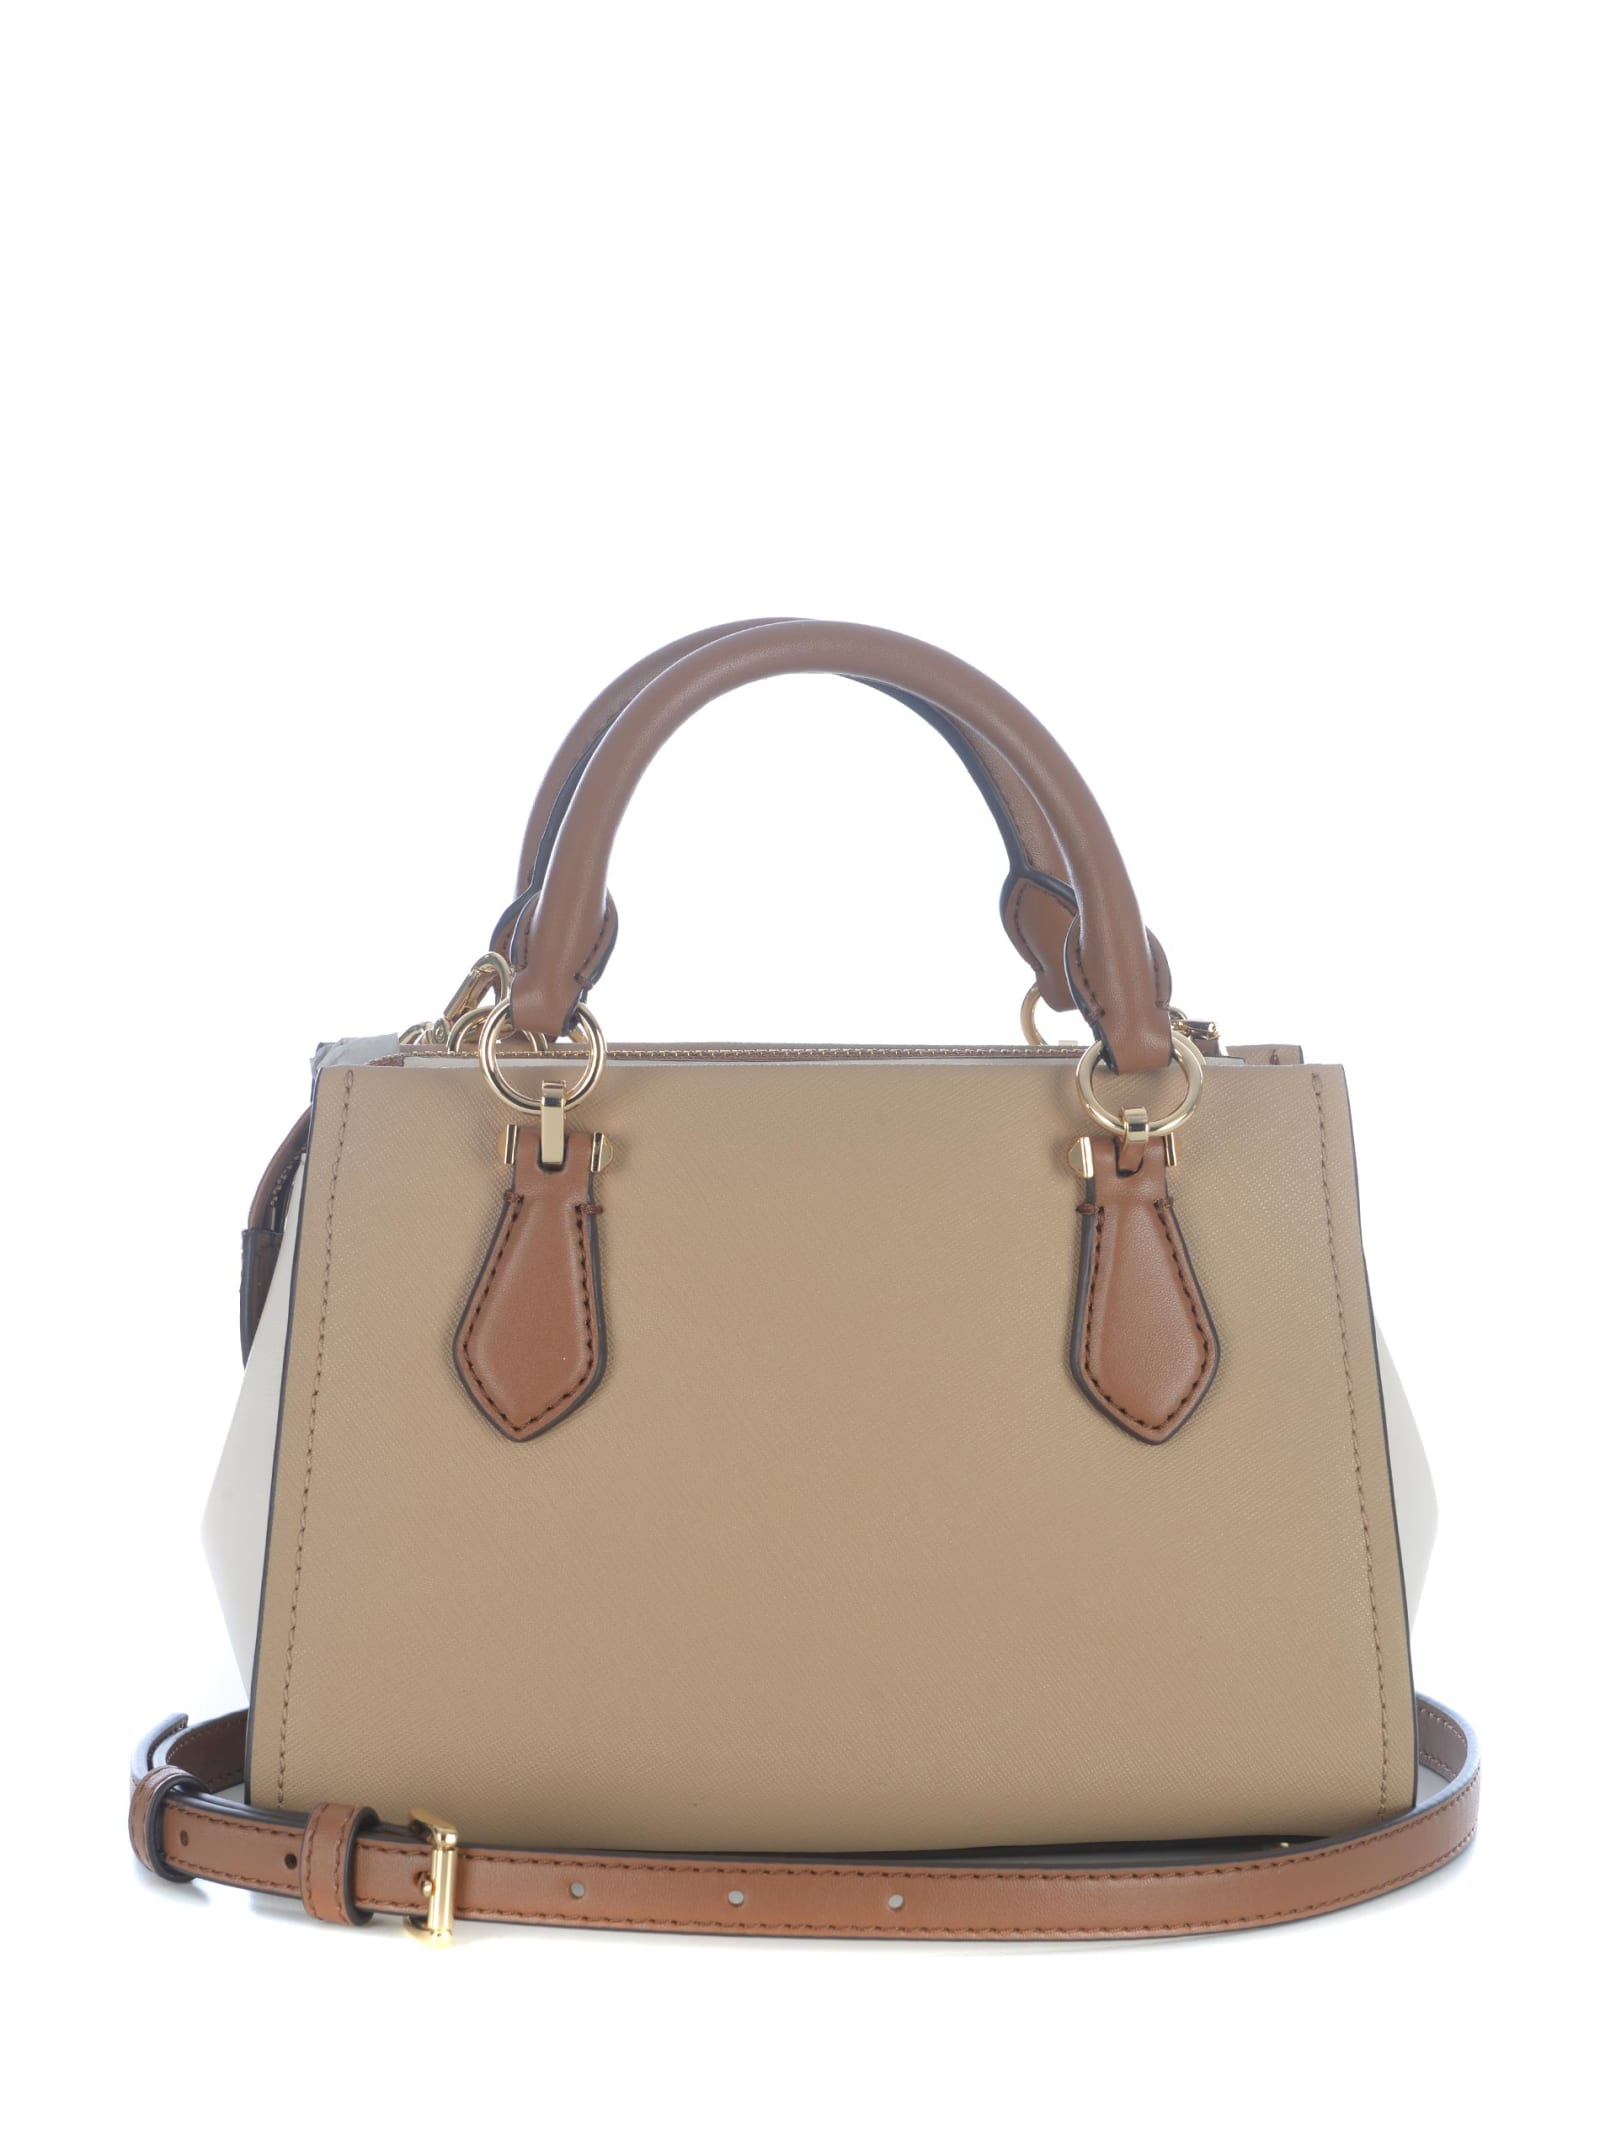 Michael Kors Bag Marilyn Small In Saffiano Leather In Cammello